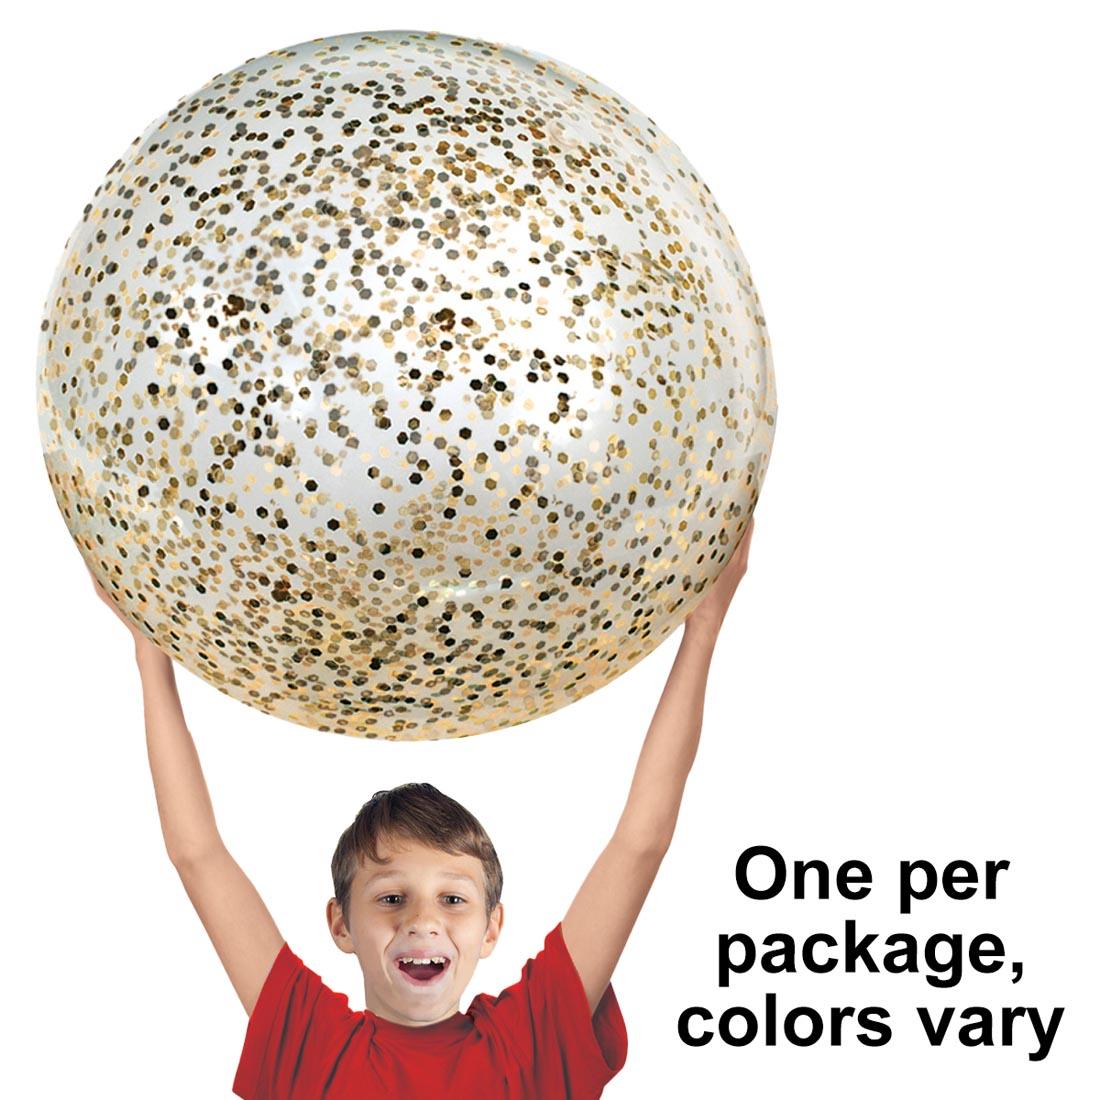 child holding a Glitter Jumbo Jelly Ball over their head with the text One per package, colors vary